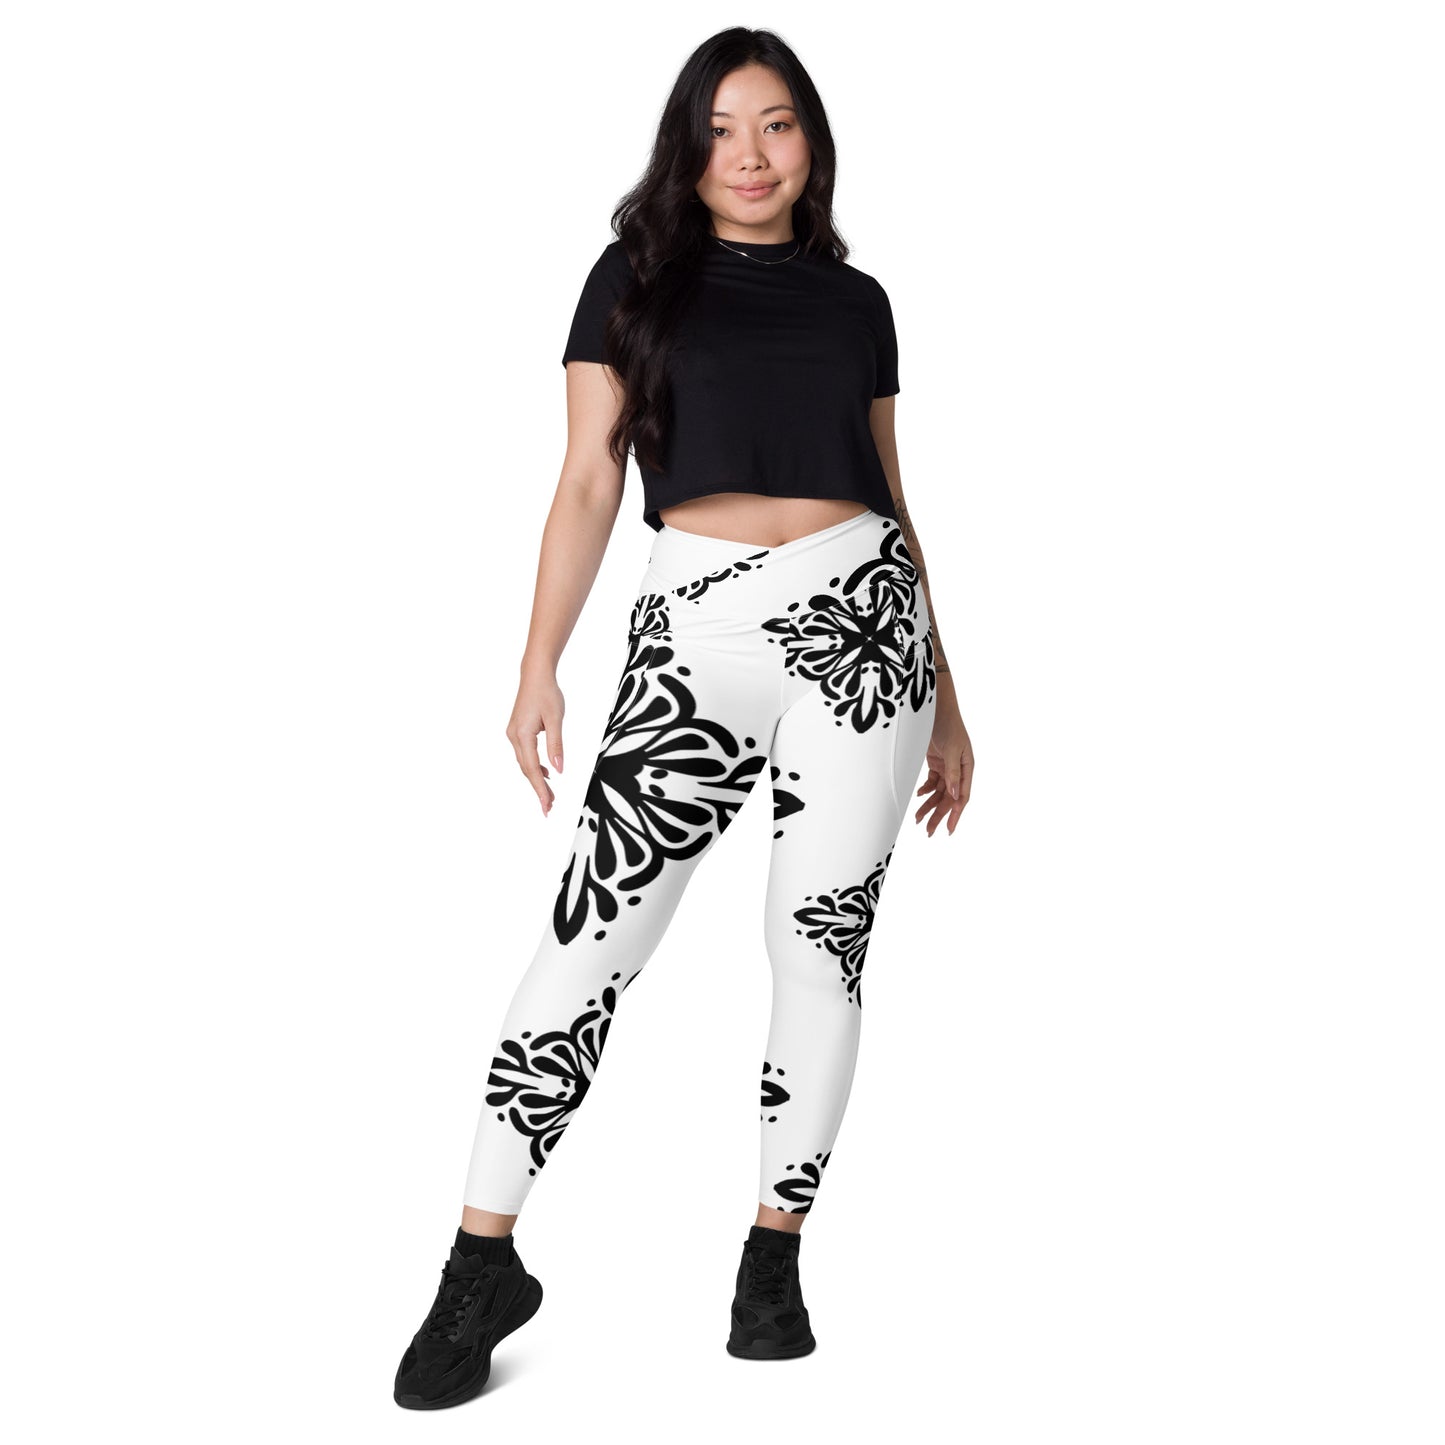 Cute black and white Crossover leggings with pockets